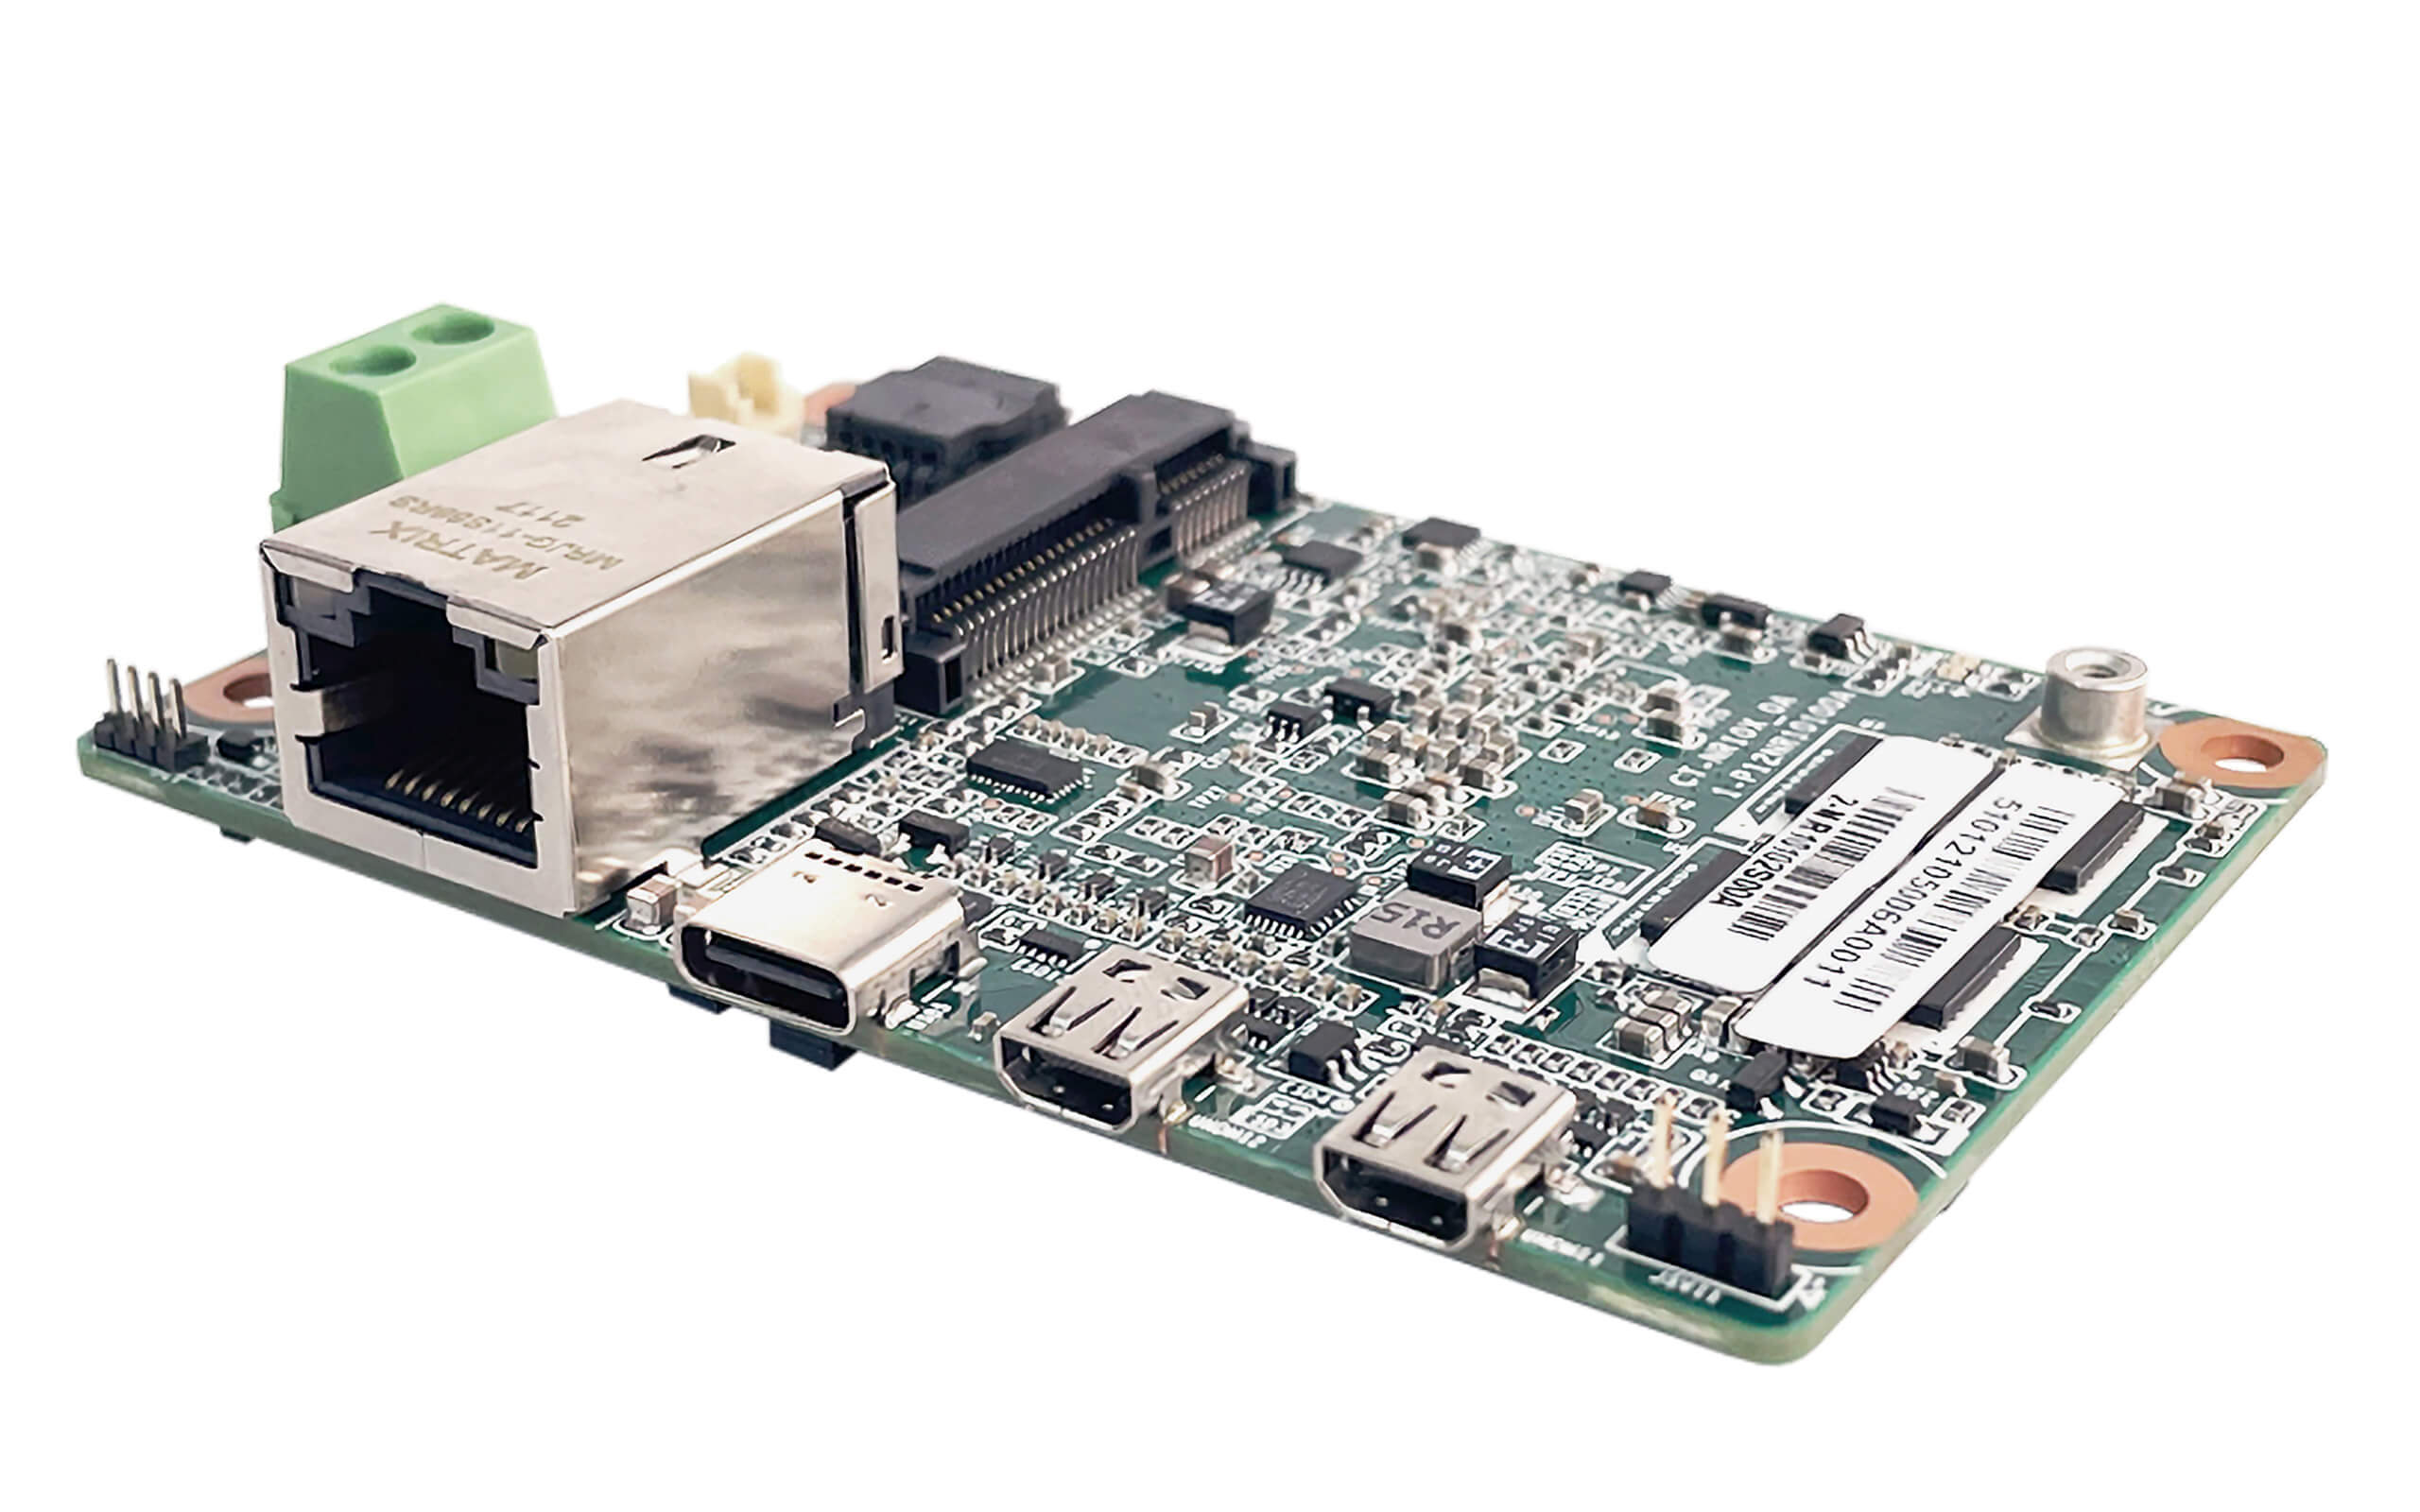 CT-NR101 1.8" SBC Industrial Motherboard with AMD Ryzen™ Embedded R1000 Series Processor